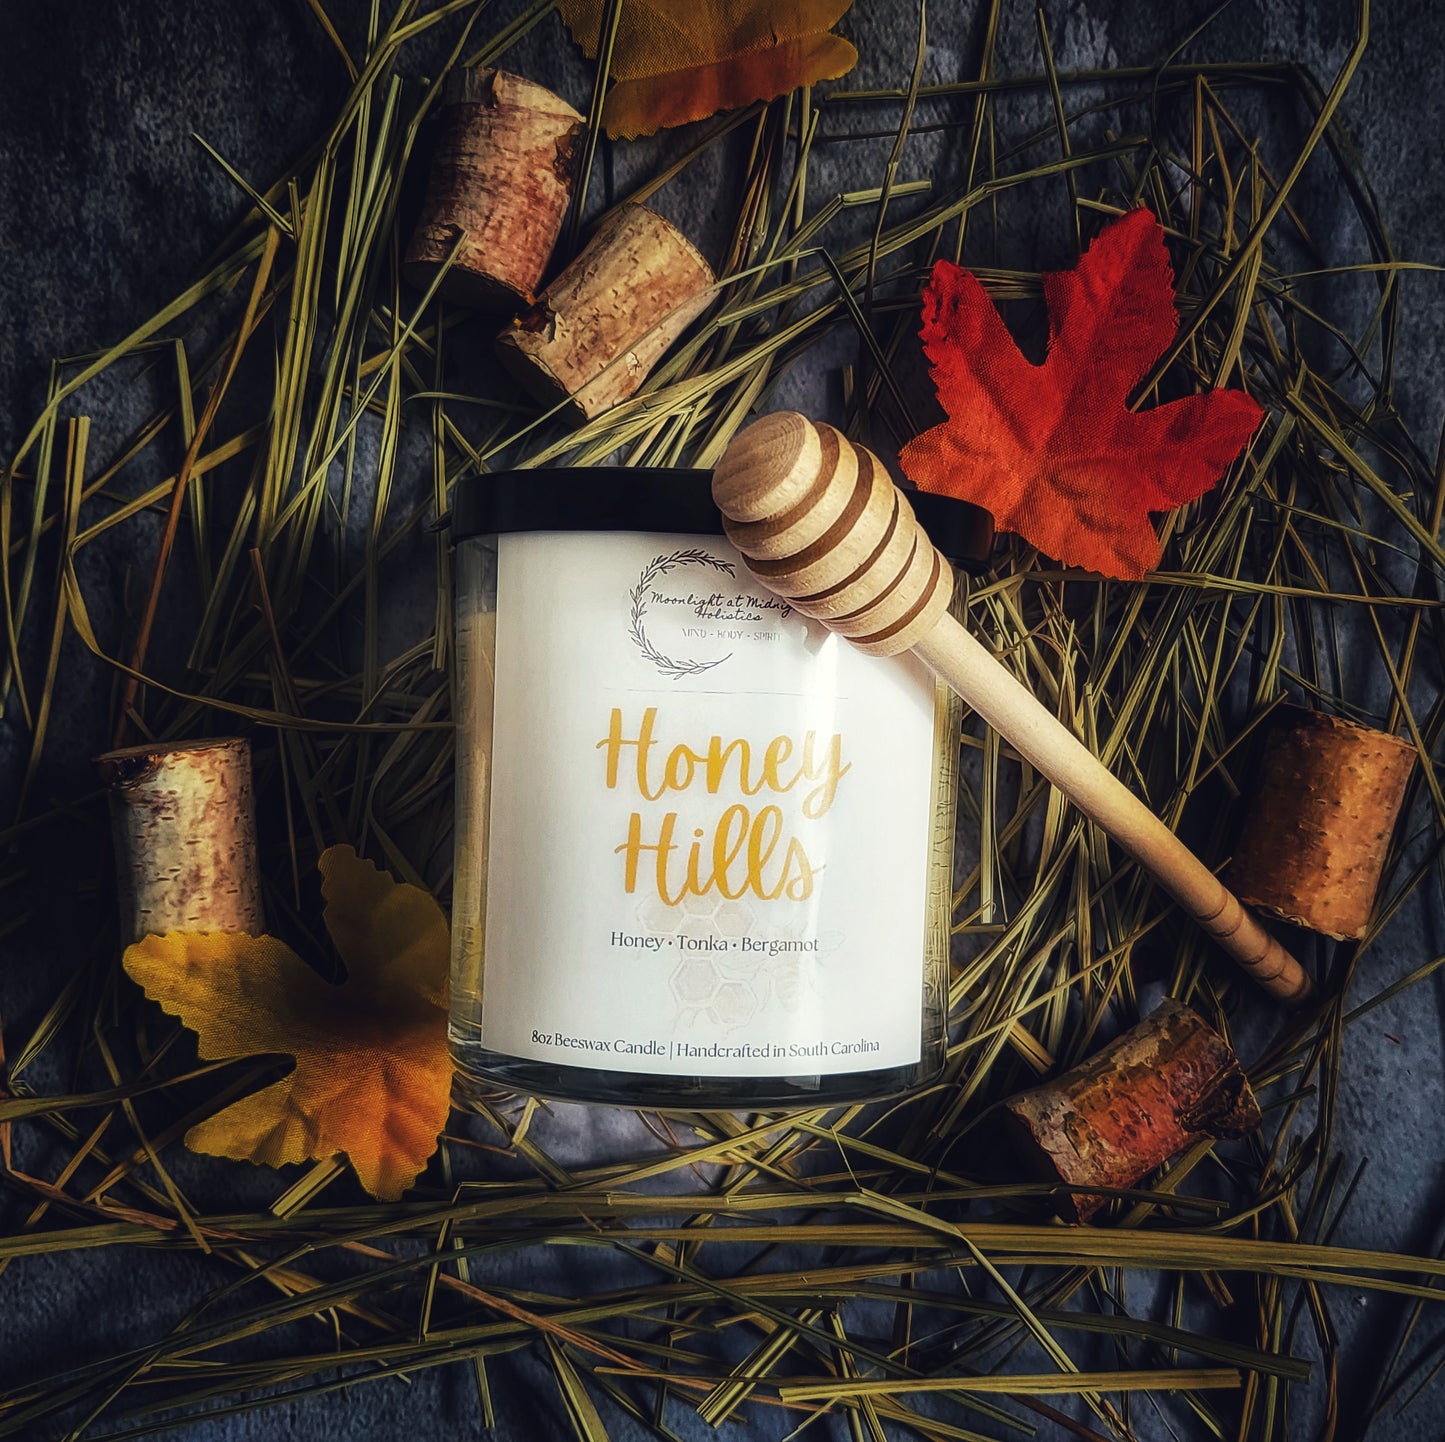 HONEY HILLS | Handmade Wood Wick Beeswax Aromatherapy Candle | Fall Candle Scent | Honey Scented Candle